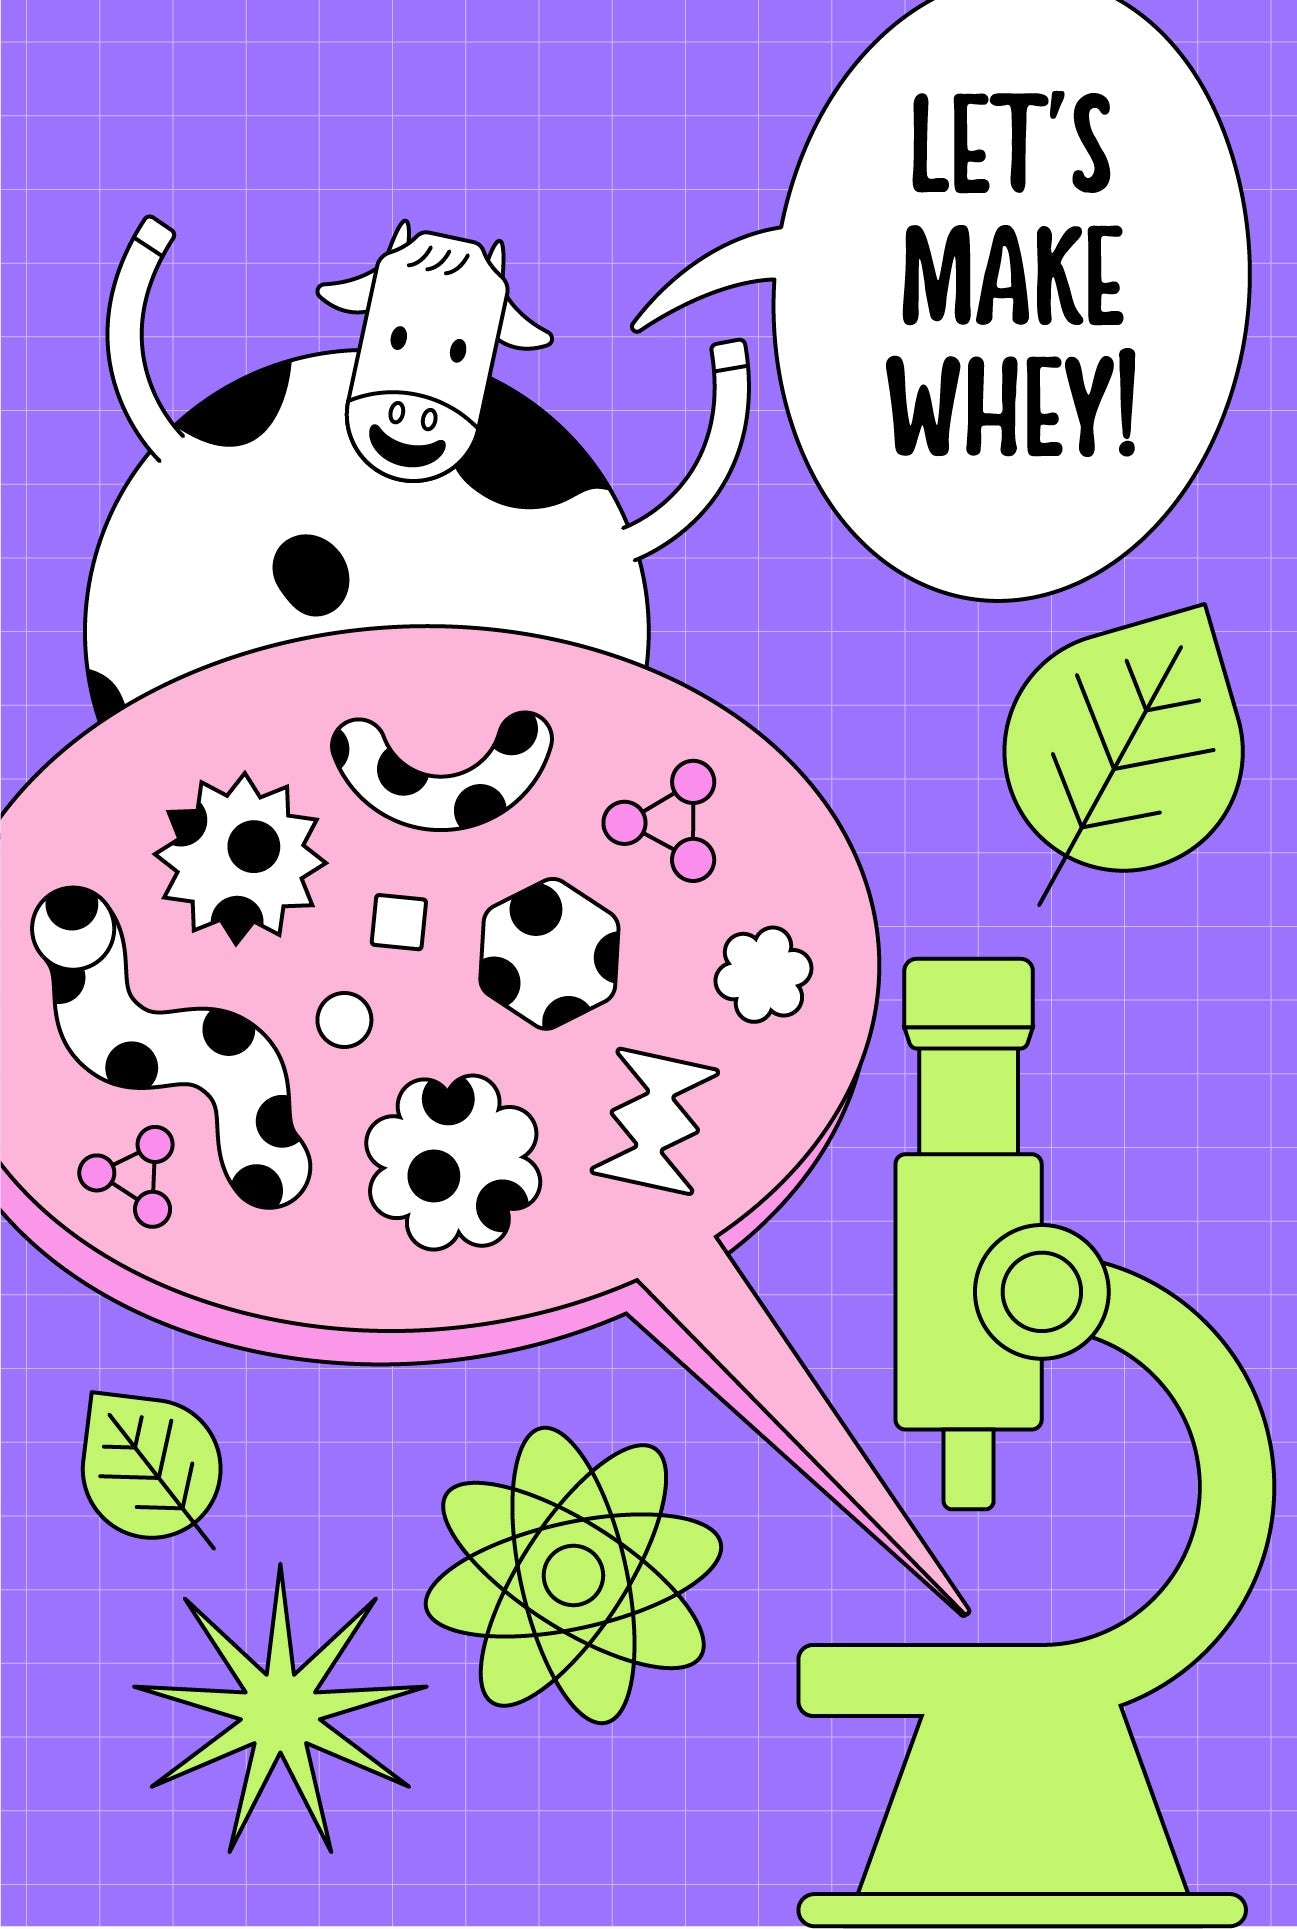 "There is a microscope showing a zoomed in view of cow-print microflora. A cow pops out from behind and exclaims gleefully, 'Let's make whey!' "